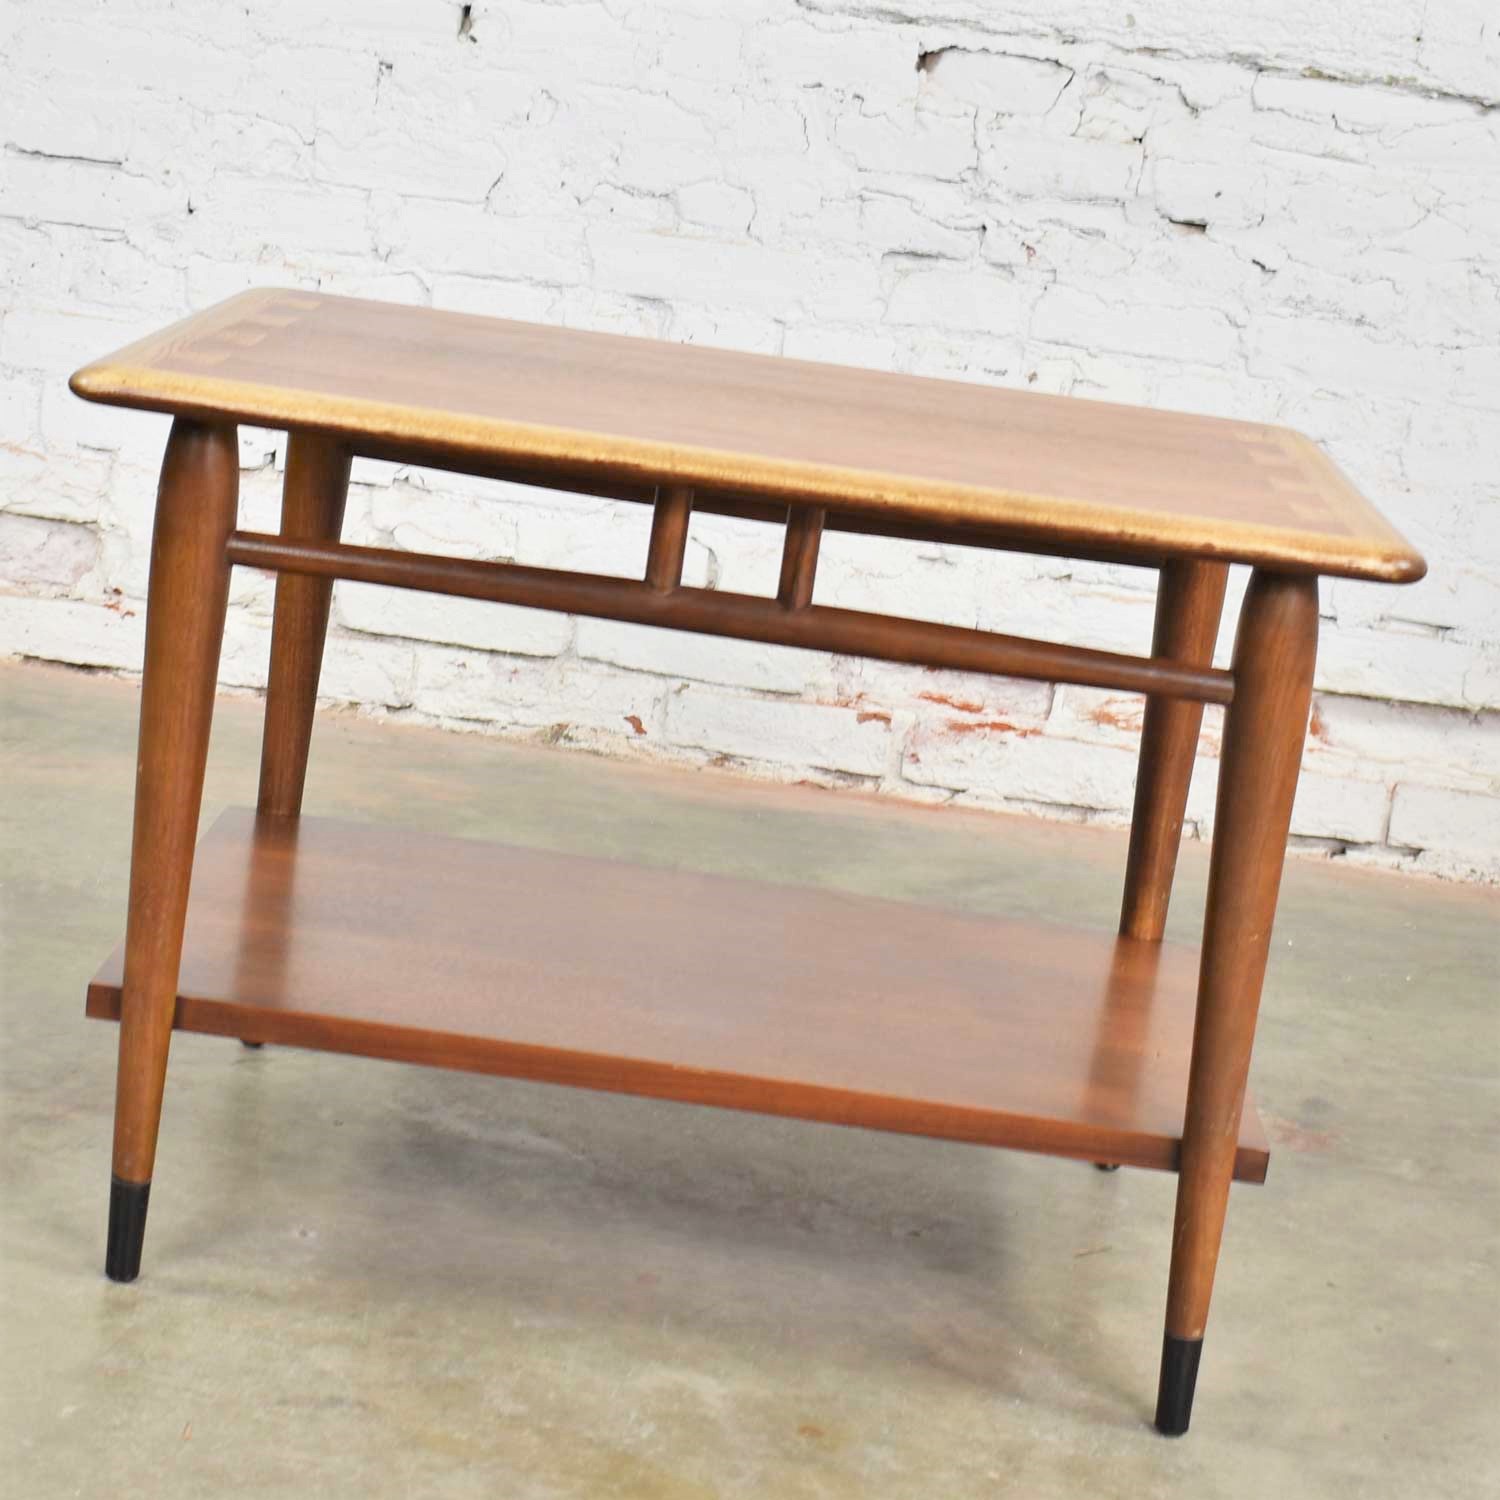 Acclaim Series 900-05 Walnut Lamp Table End Table by Andre Bus for Lane